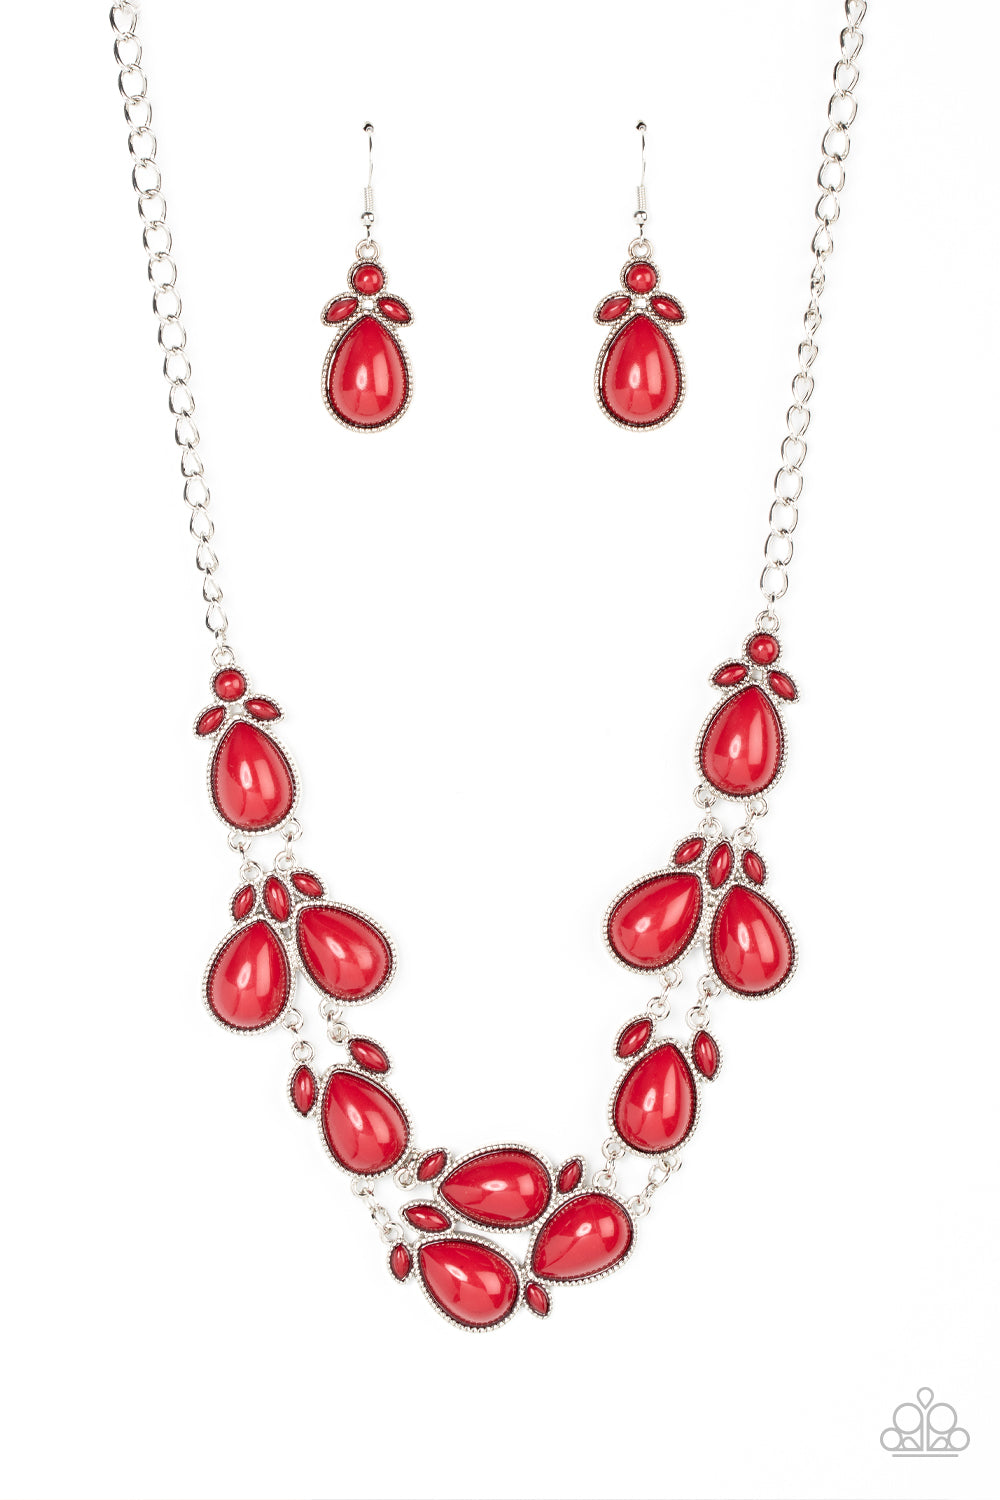 Botanical Banquet - Red Necklace - Paparazzi Accessories